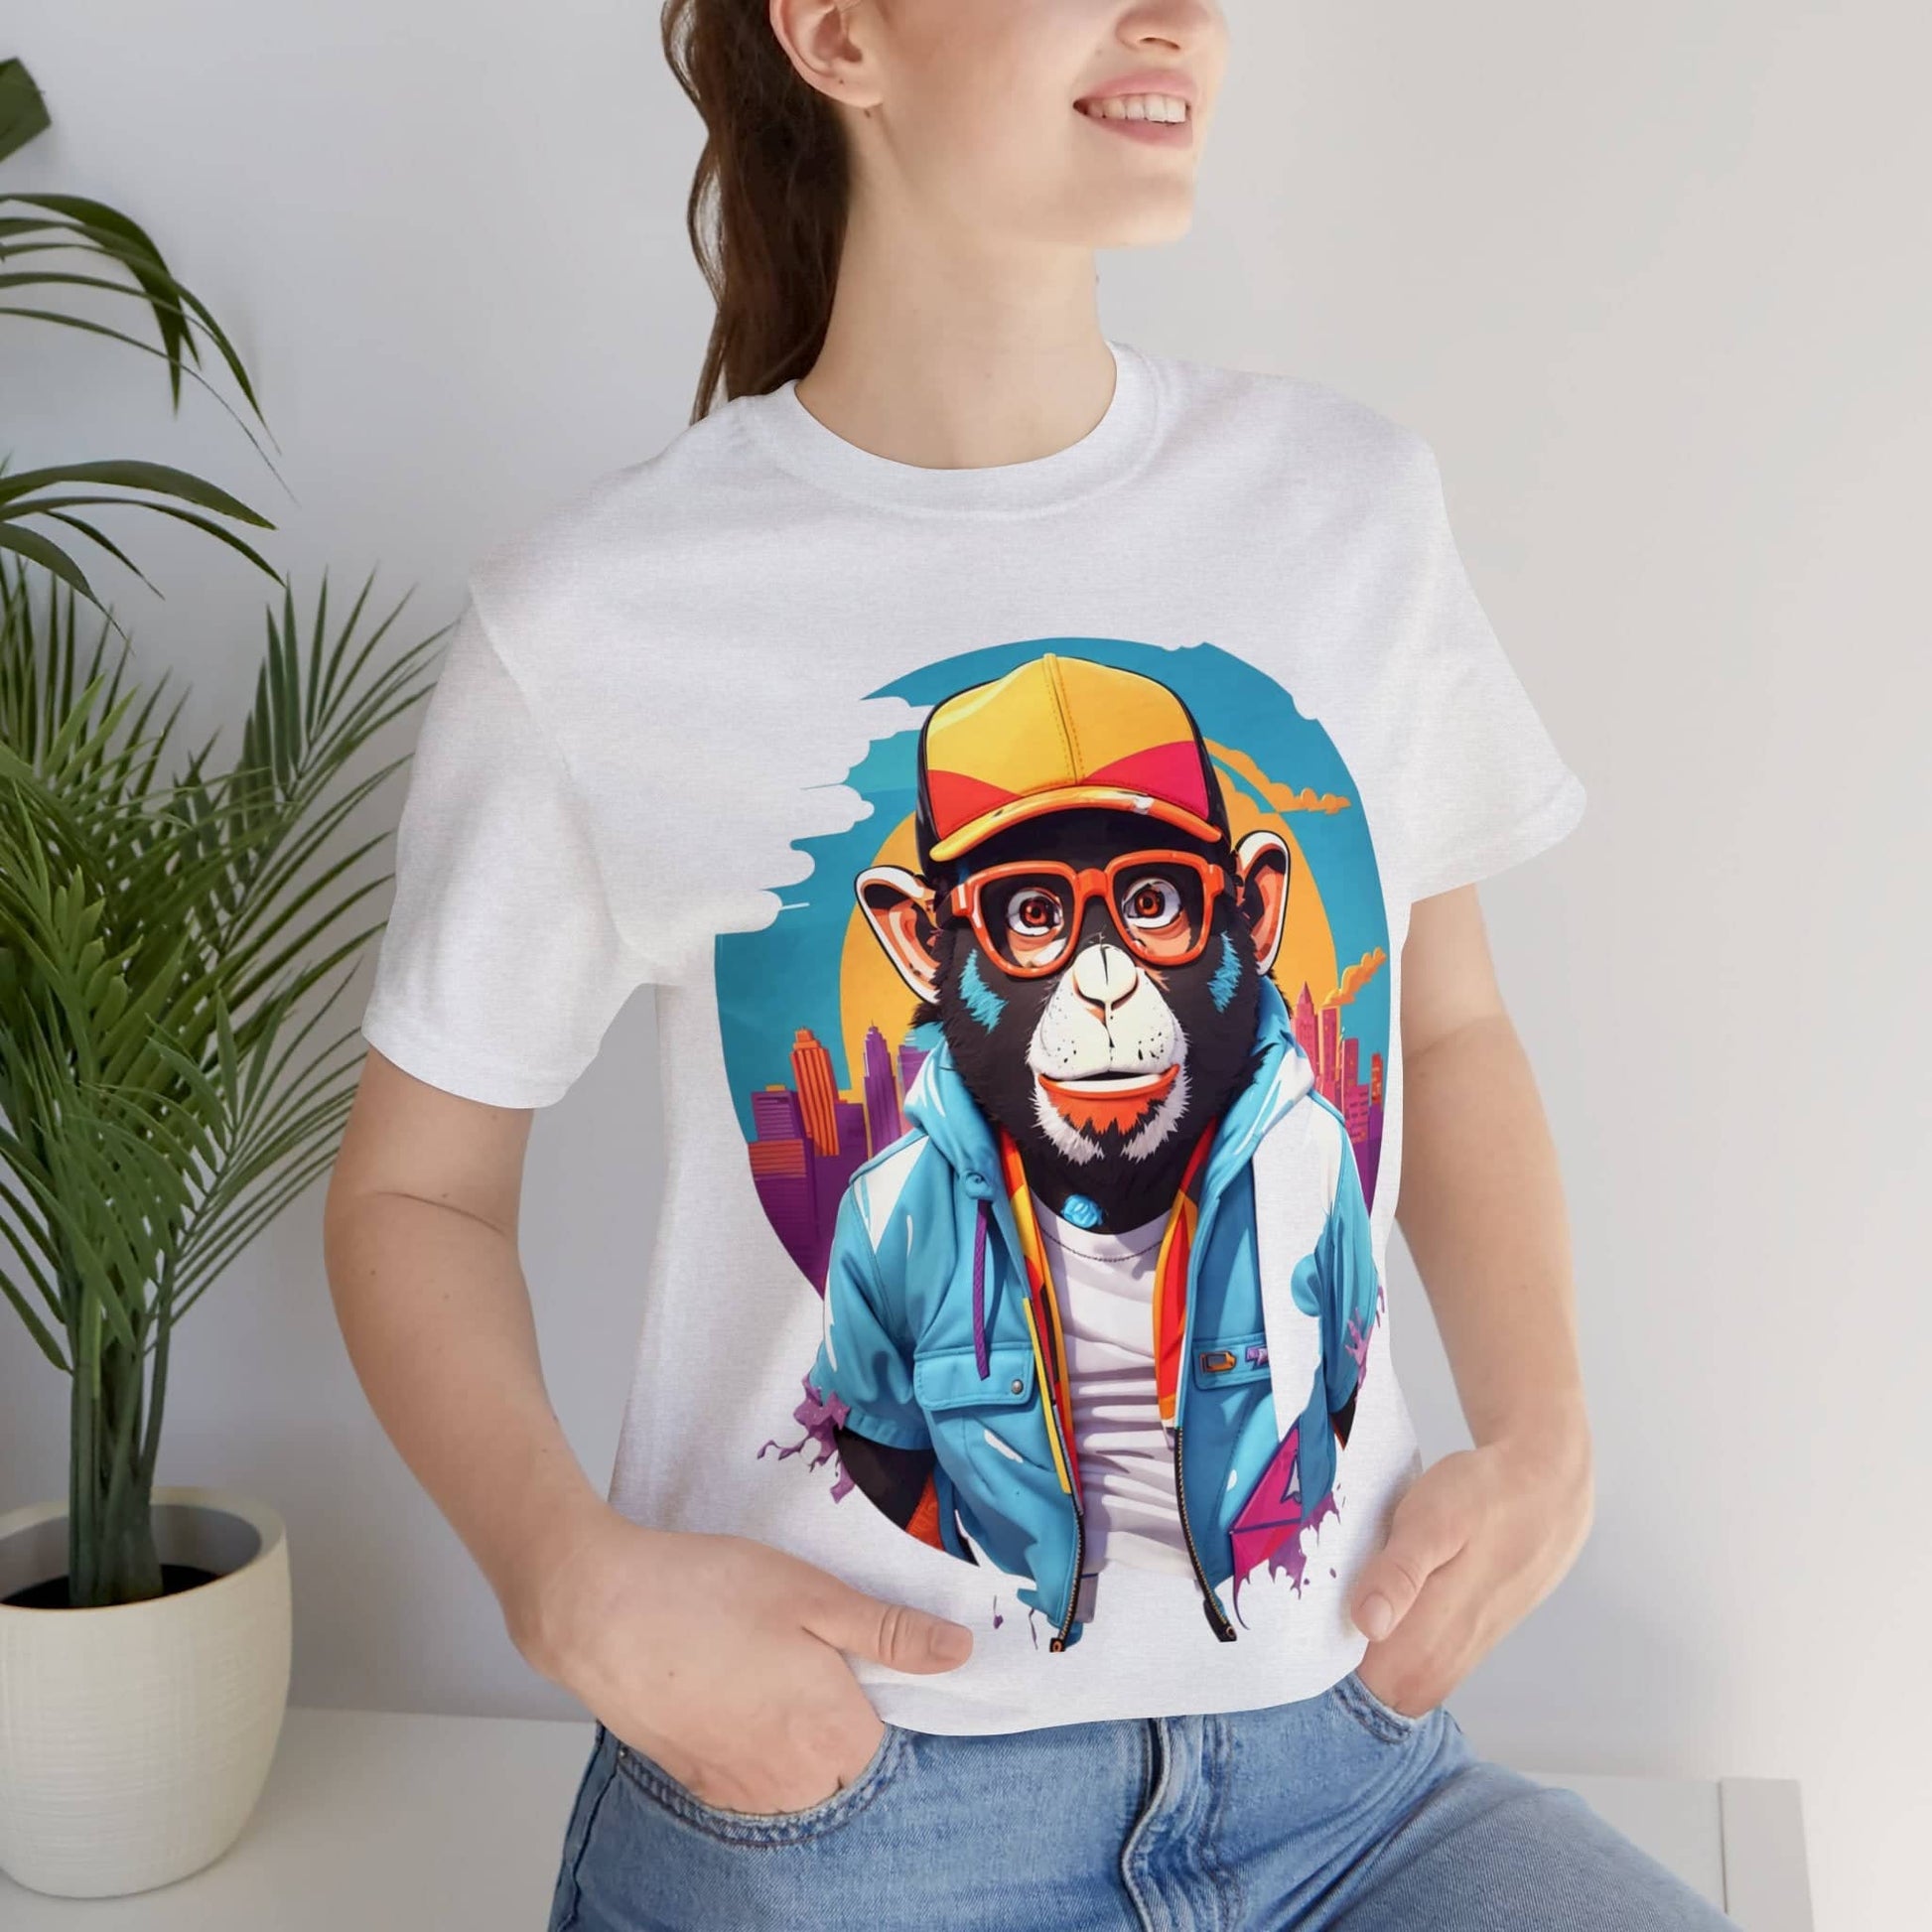 "Limited Edition Graffiti Gorilla: Urban Hip-Hop Graphic Tee for the Trendy Streetwear Connoisseur" T-Shirt Bigger Than Life Ash S 